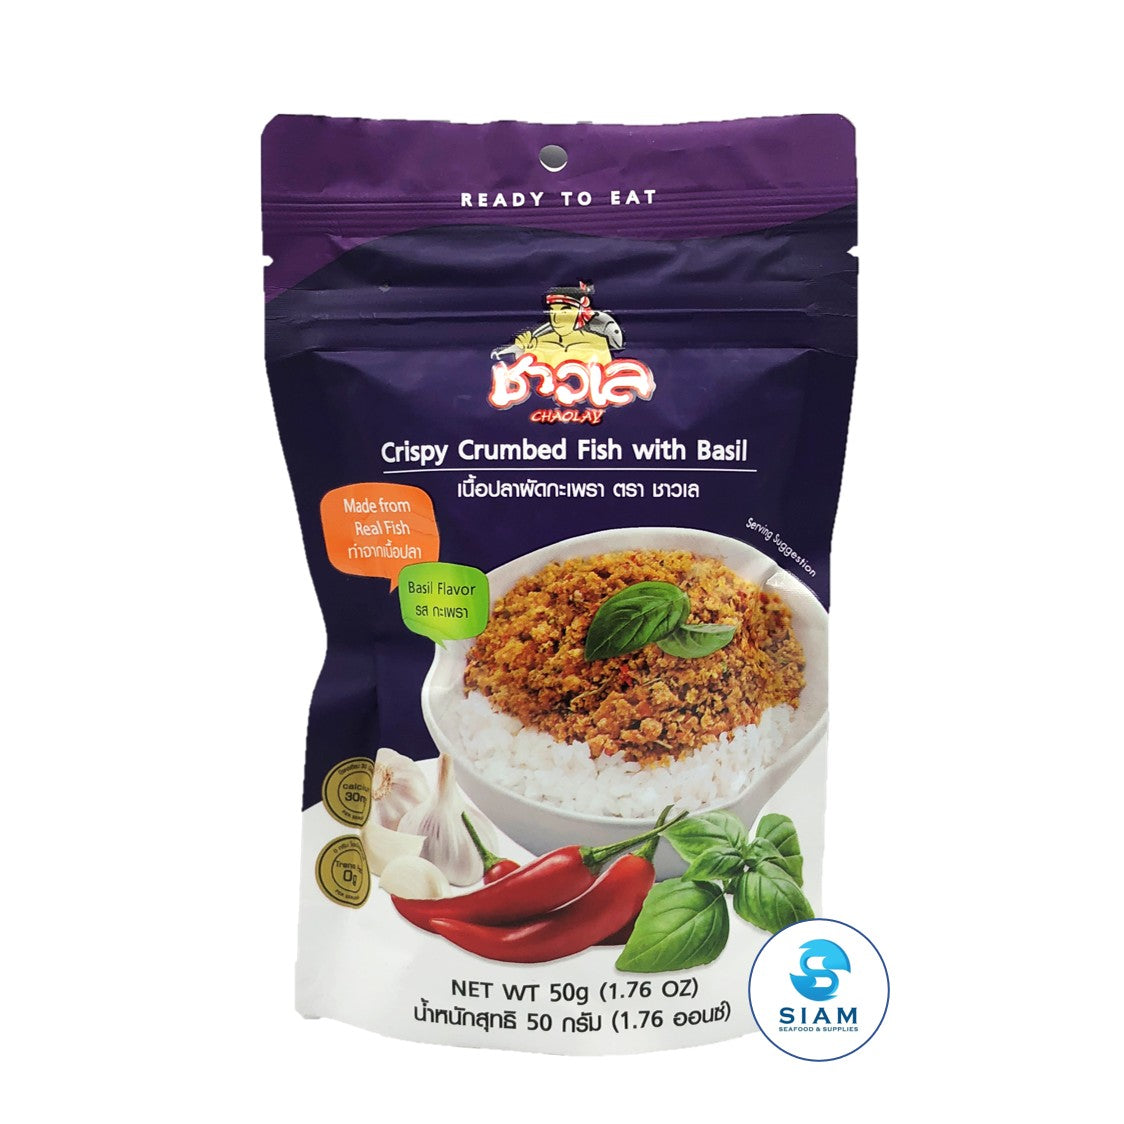 Crispy Crumbed Fish with Basil - Chaolay (1.76 oz-Net Wt 2.1 oz) ?????????????????? ???????? ??shippable Siam Store - Thai & Asian Food Market